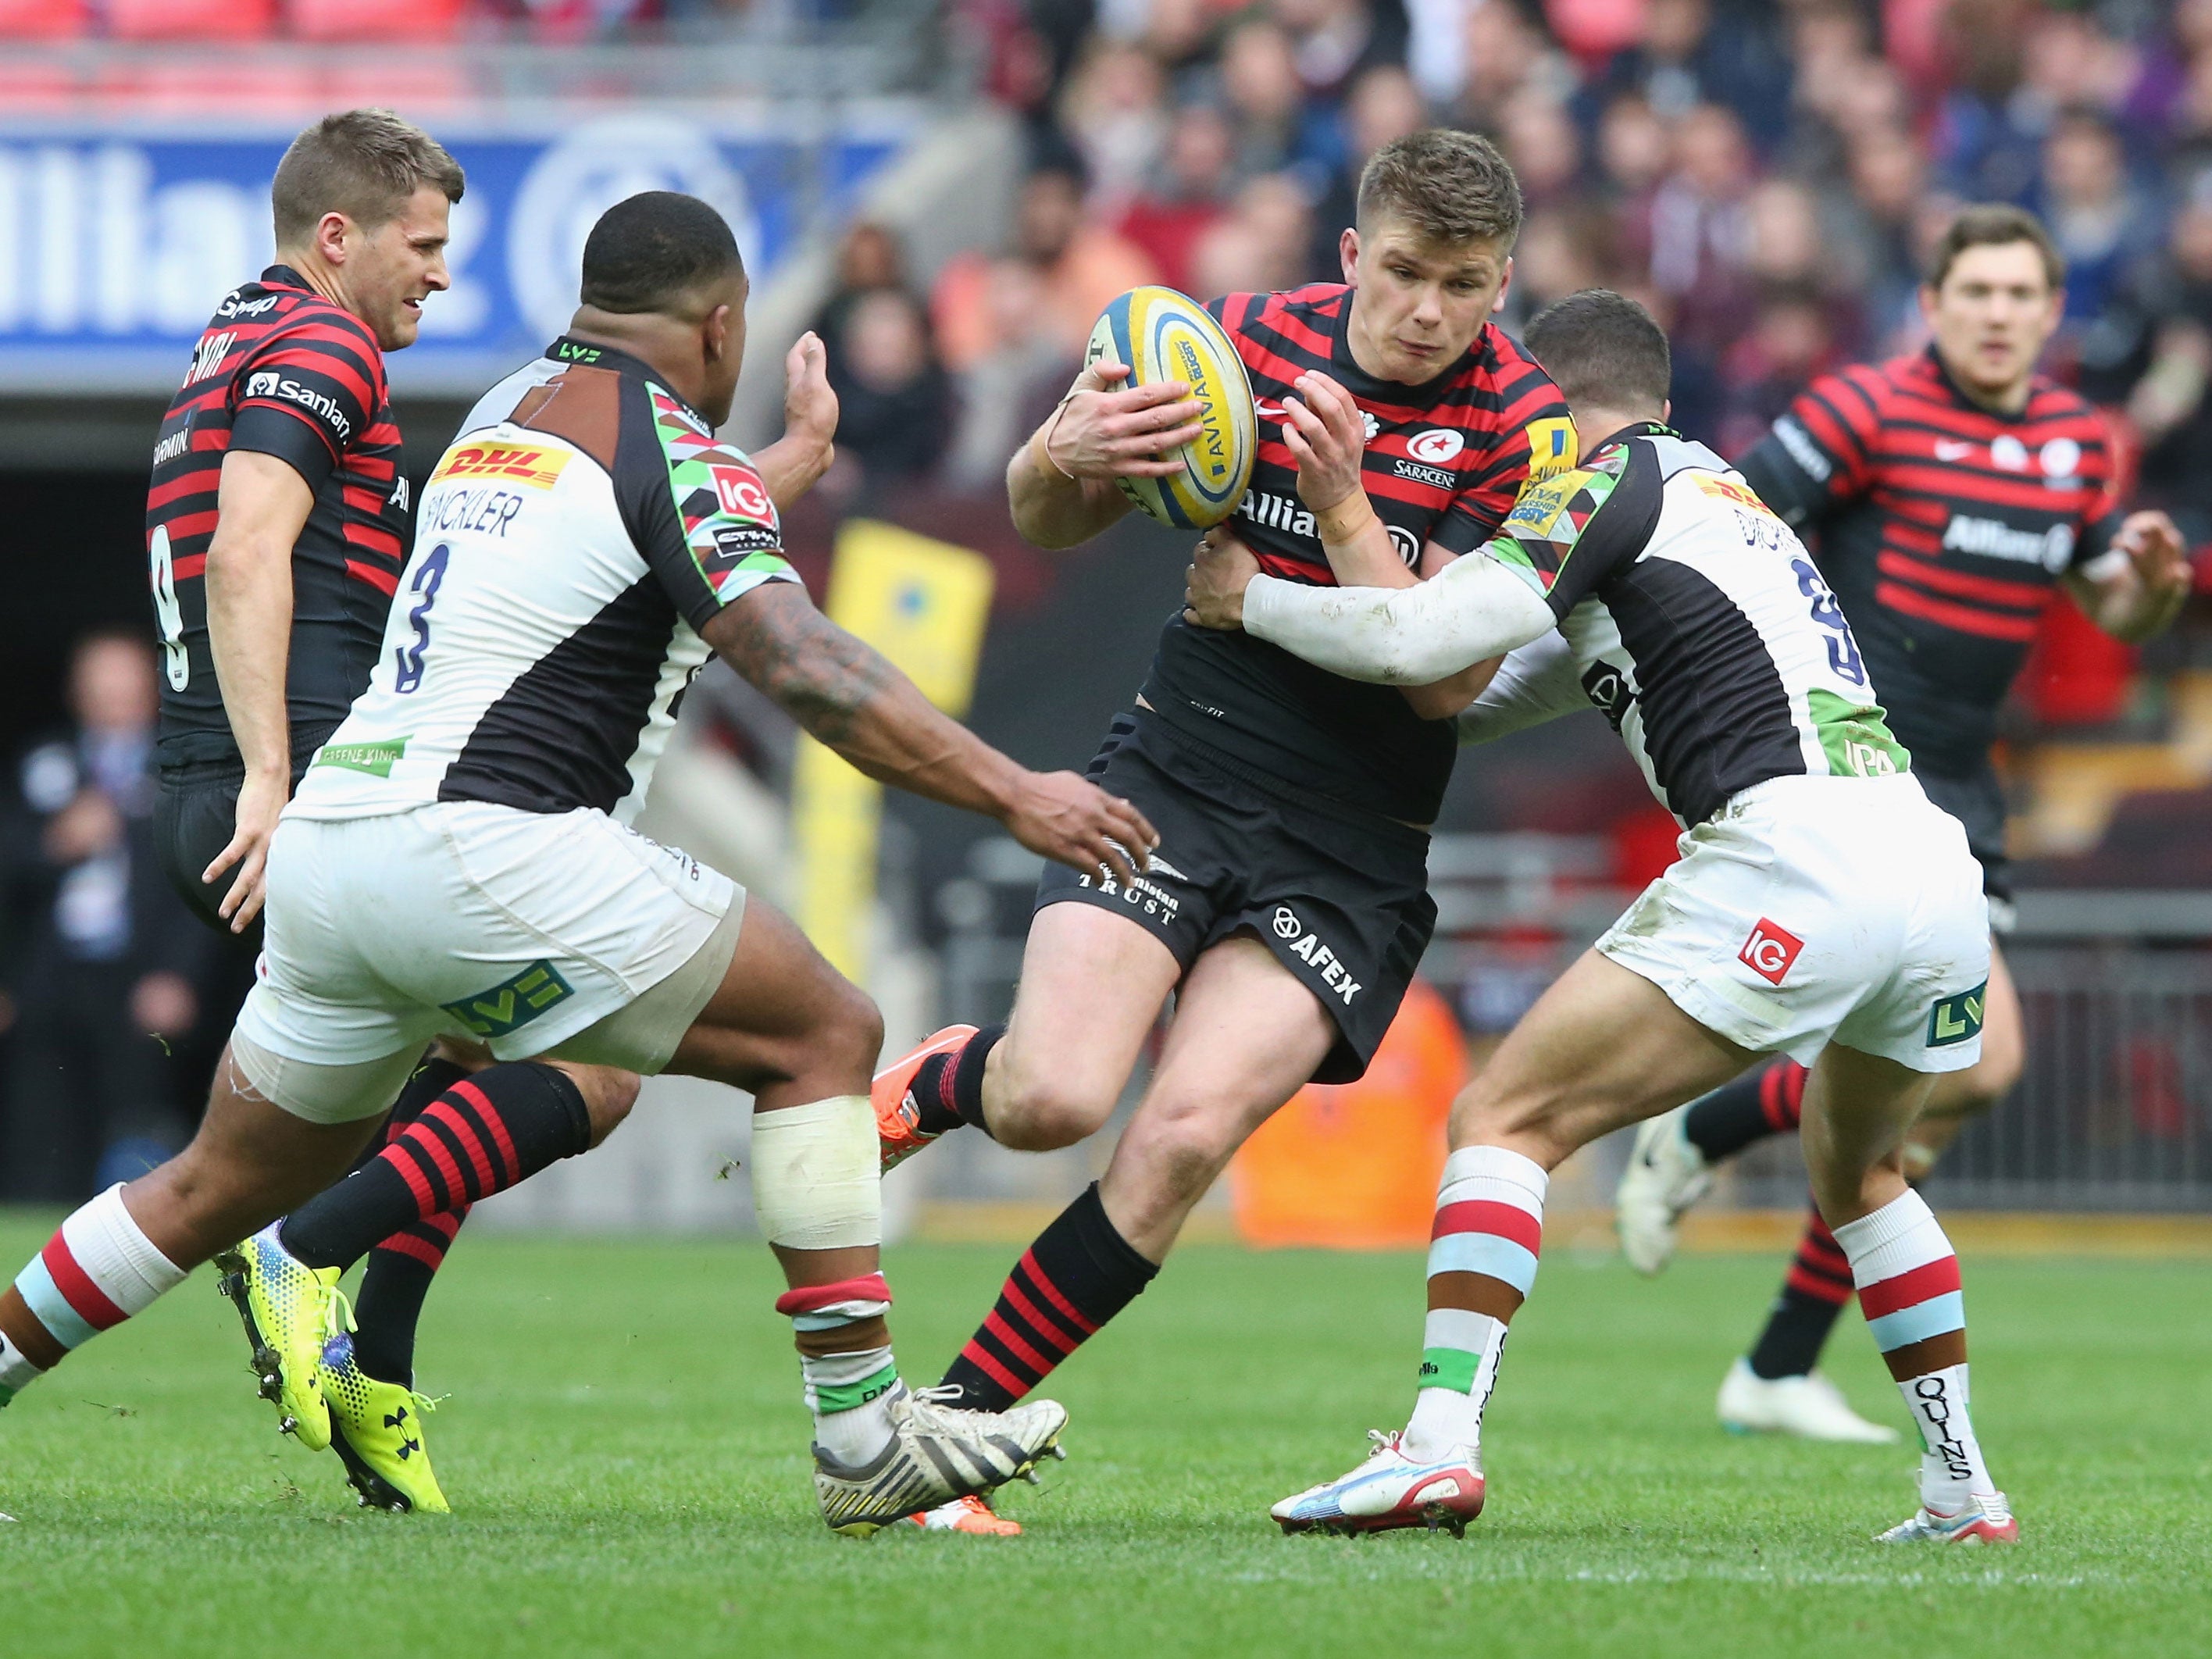 Owen Farrell is tackled by Harlequins' Karl Dickson as Kyle Sinckler closes in